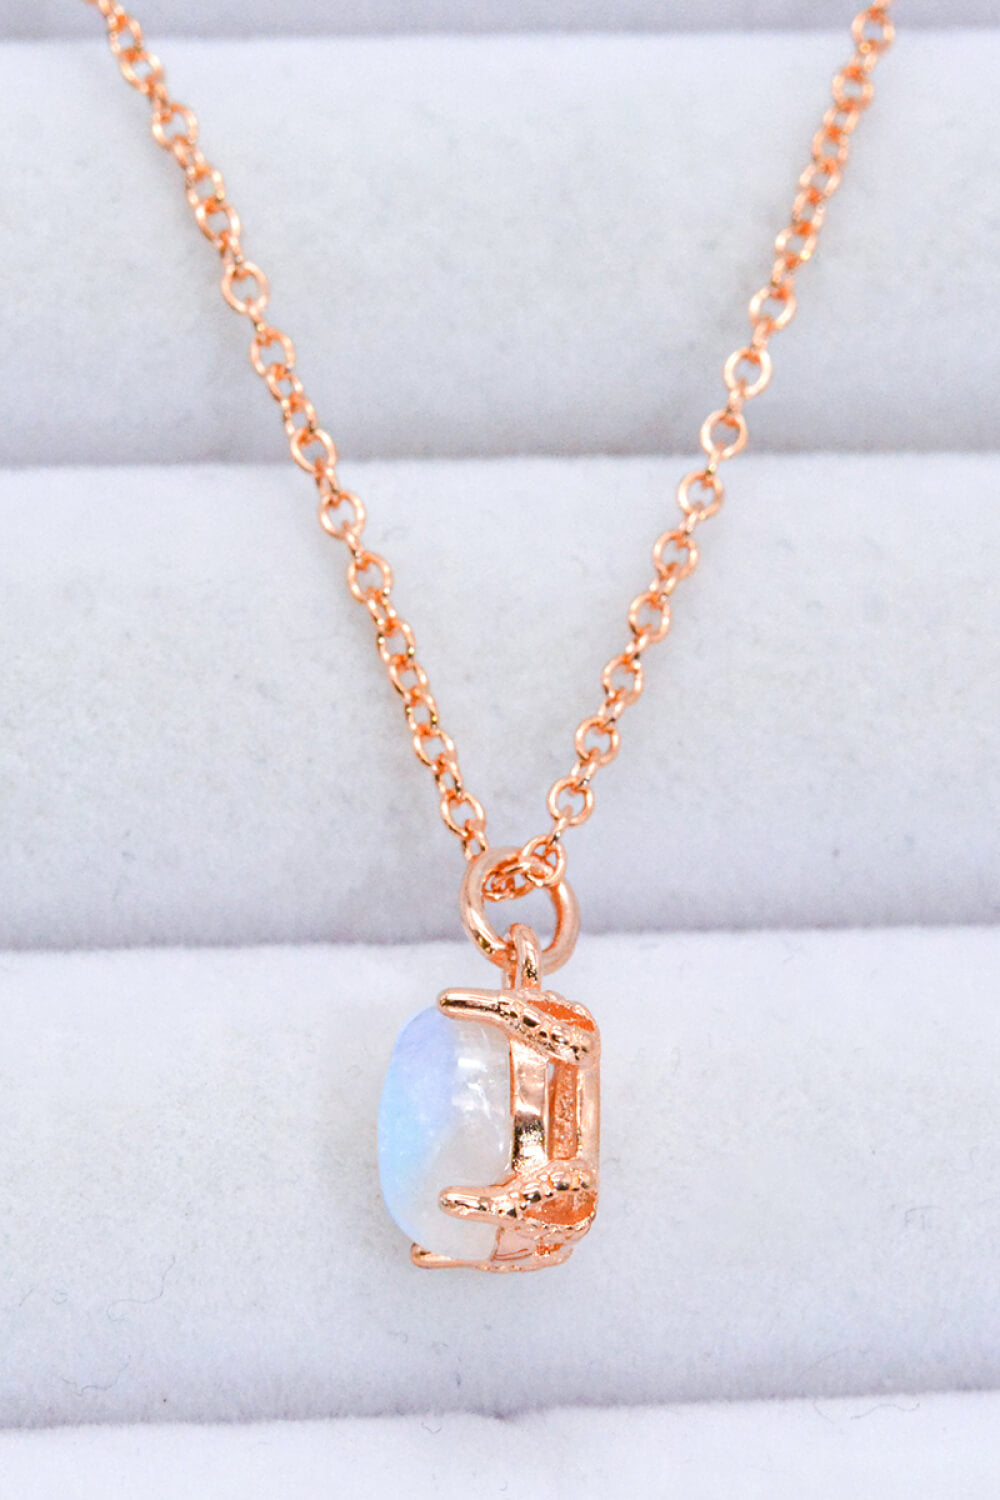 Natural 4-Prong Pendant Moonstone Necklace - Tophatter Deals